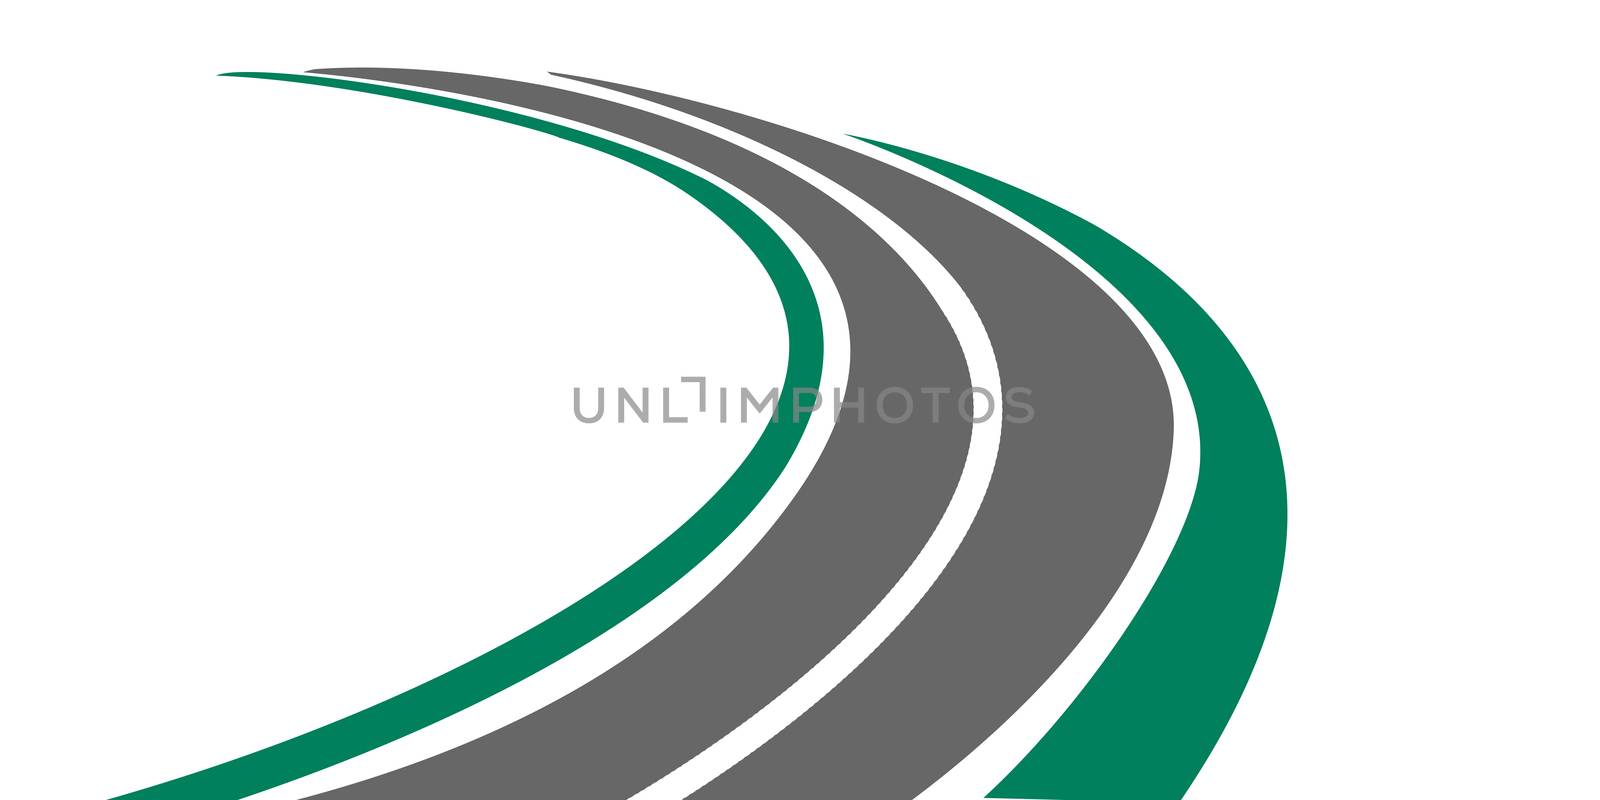 Winding paved road icon with green grassy roadside by tang90246